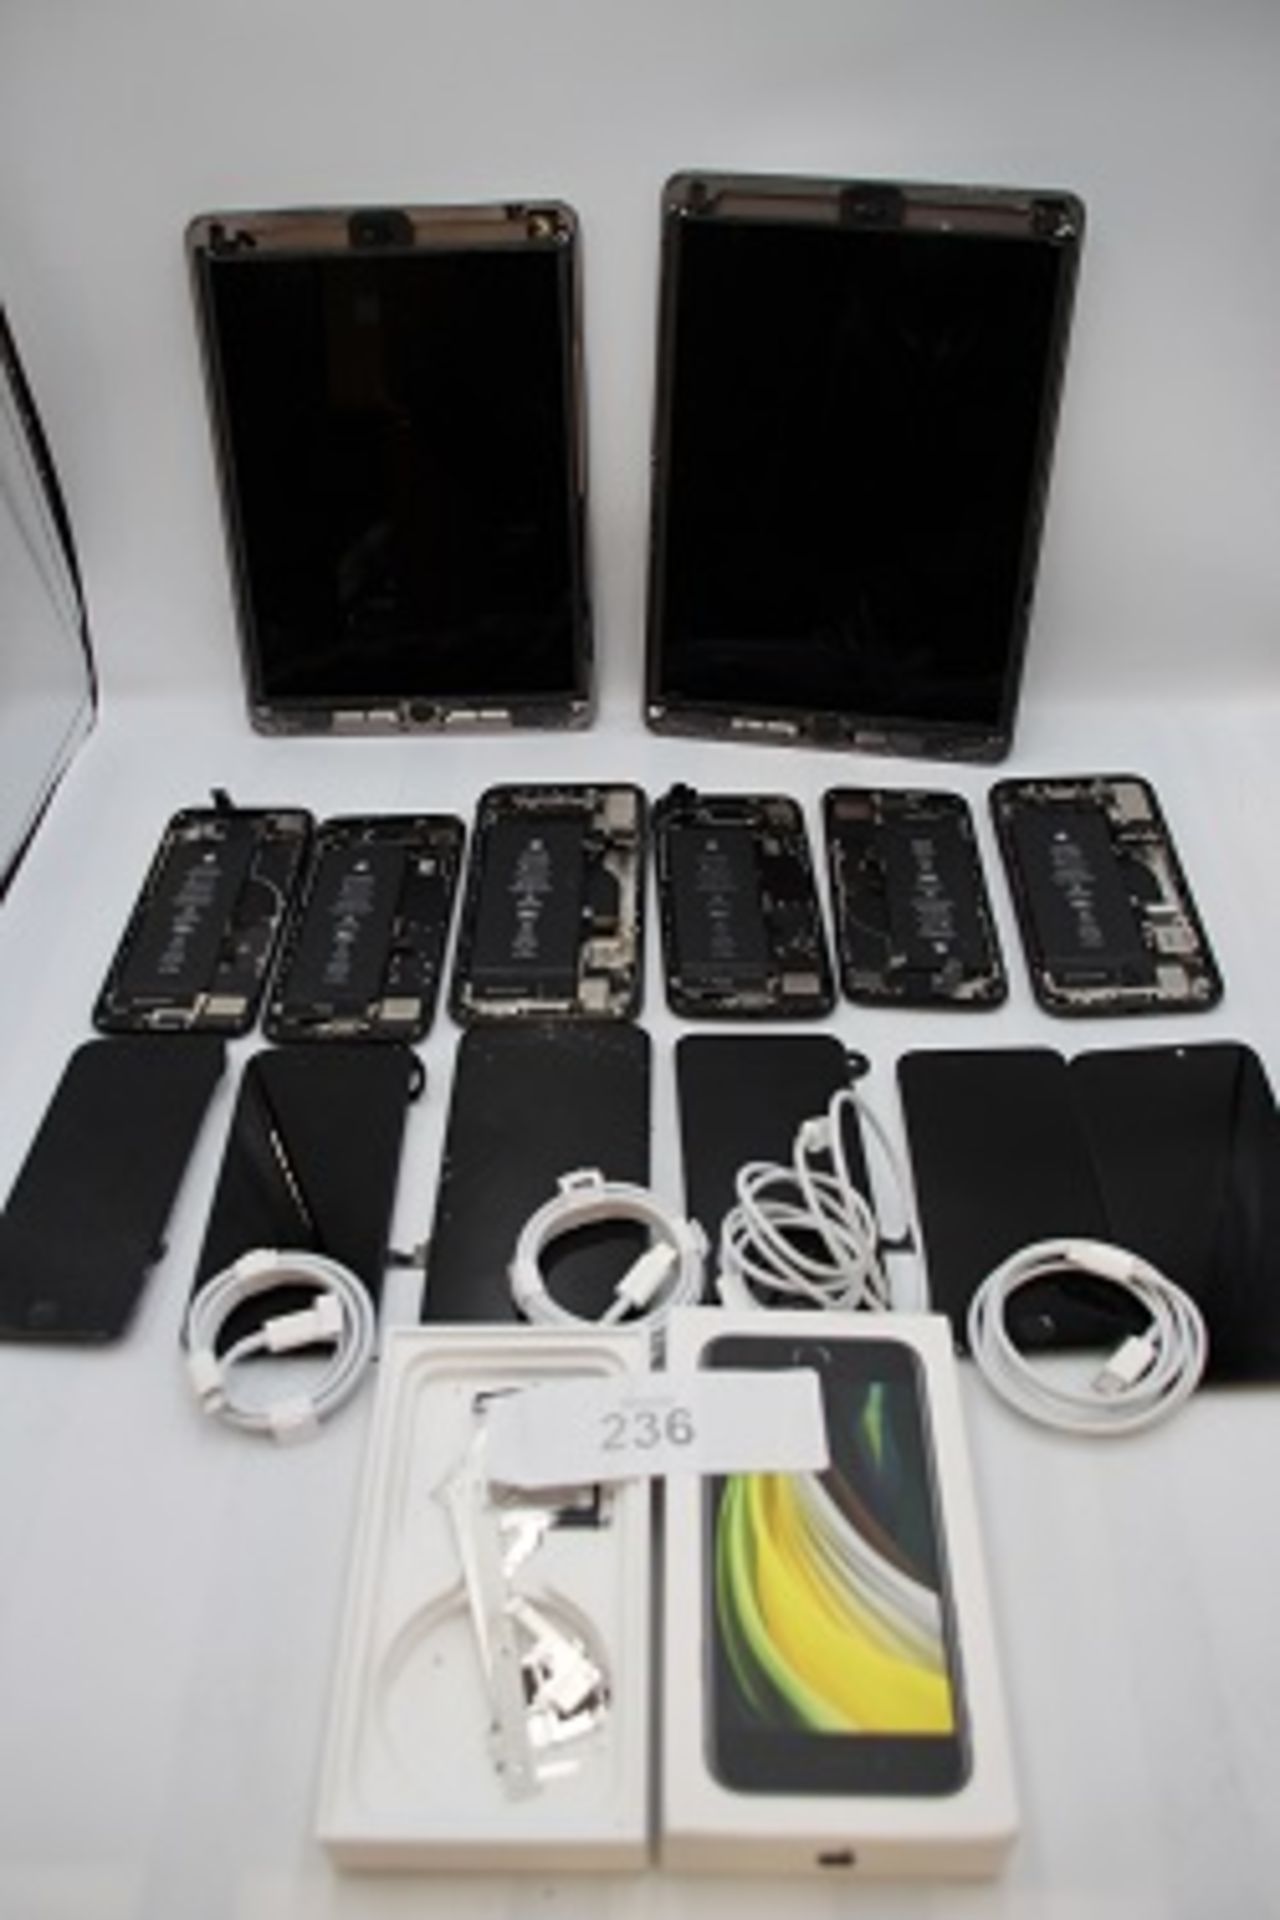 A selection of Apple iPhone spares including chassis, batteries and screens, logic boards